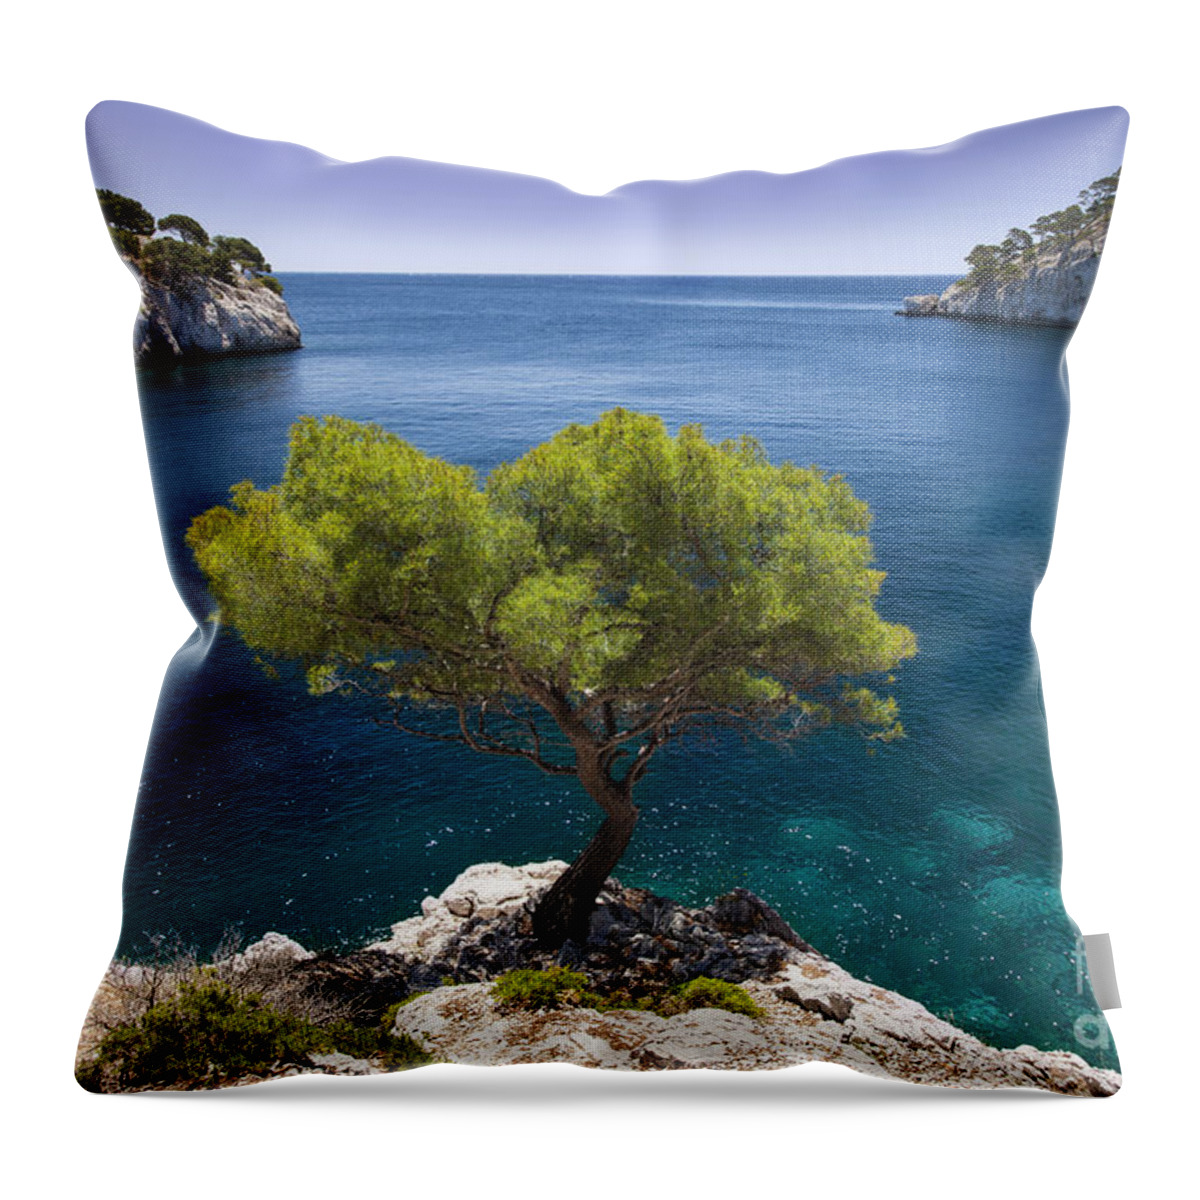 France Throw Pillow featuring the photograph Lone Pine Tree Provence France by Brian Jannsen